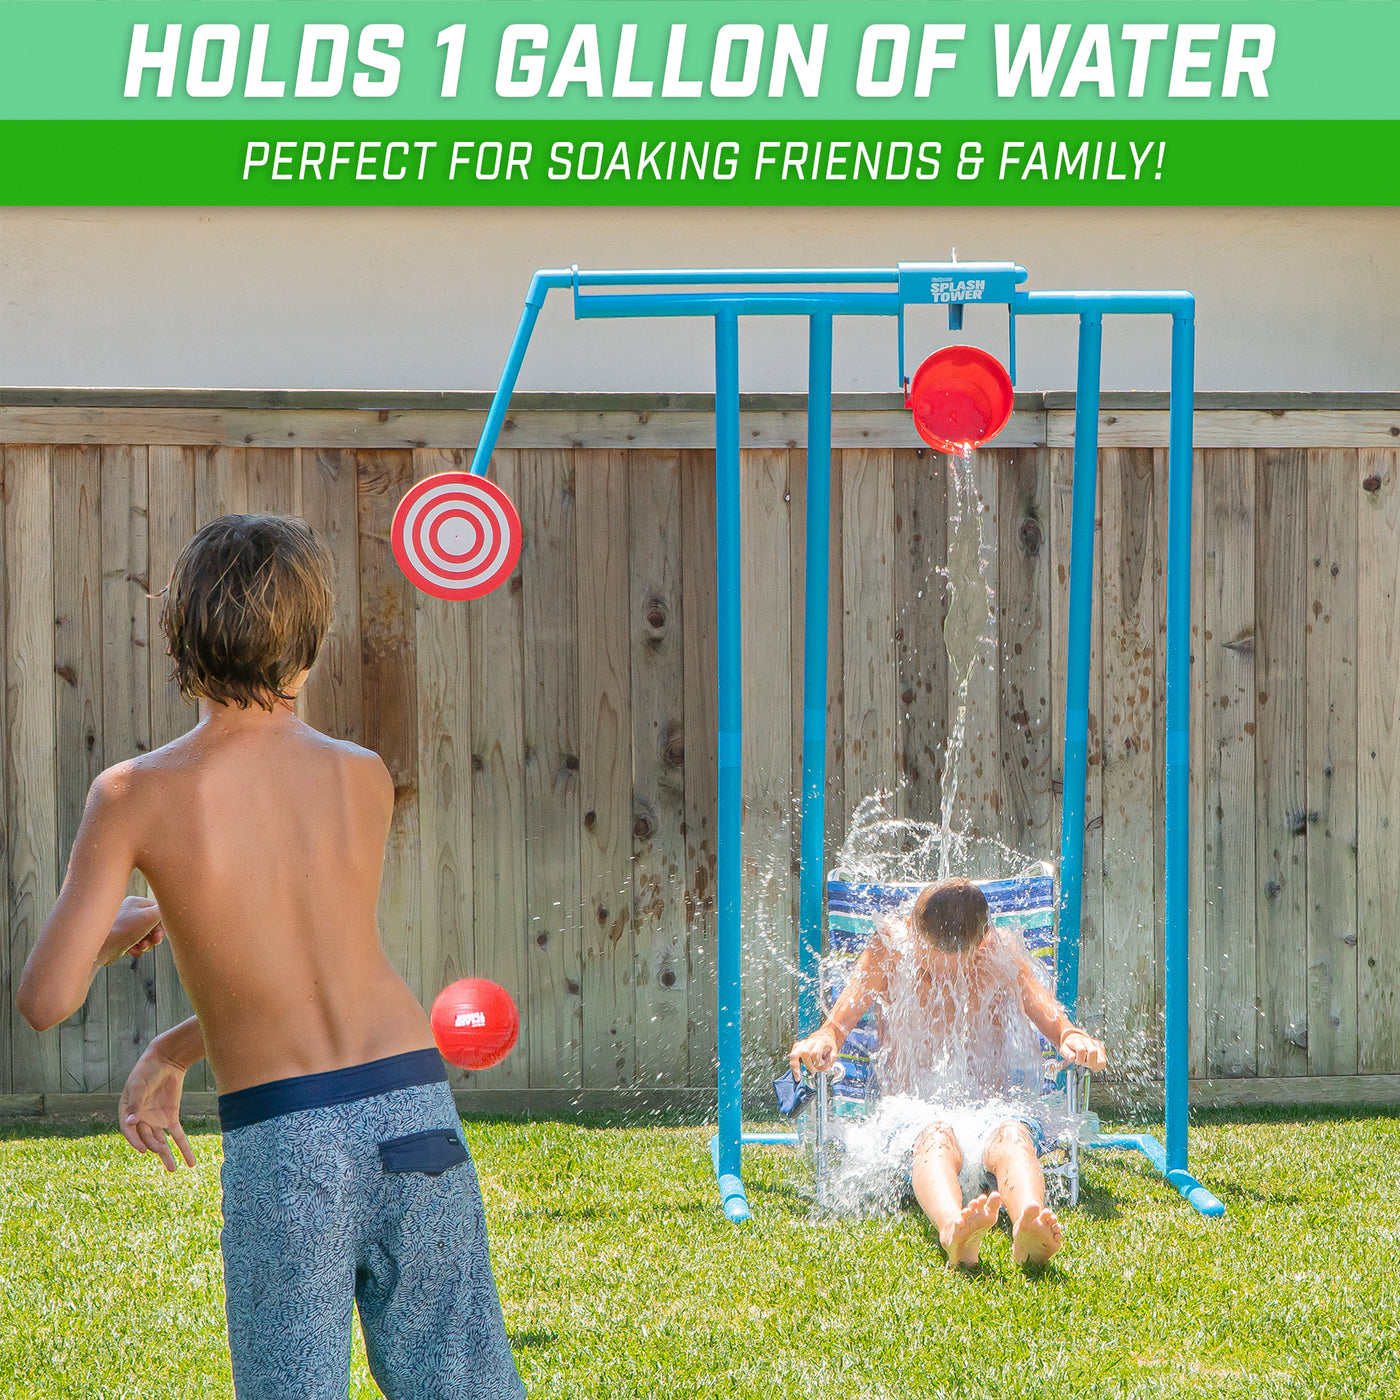 sports interactive water dunk tank game by rocket inflatables